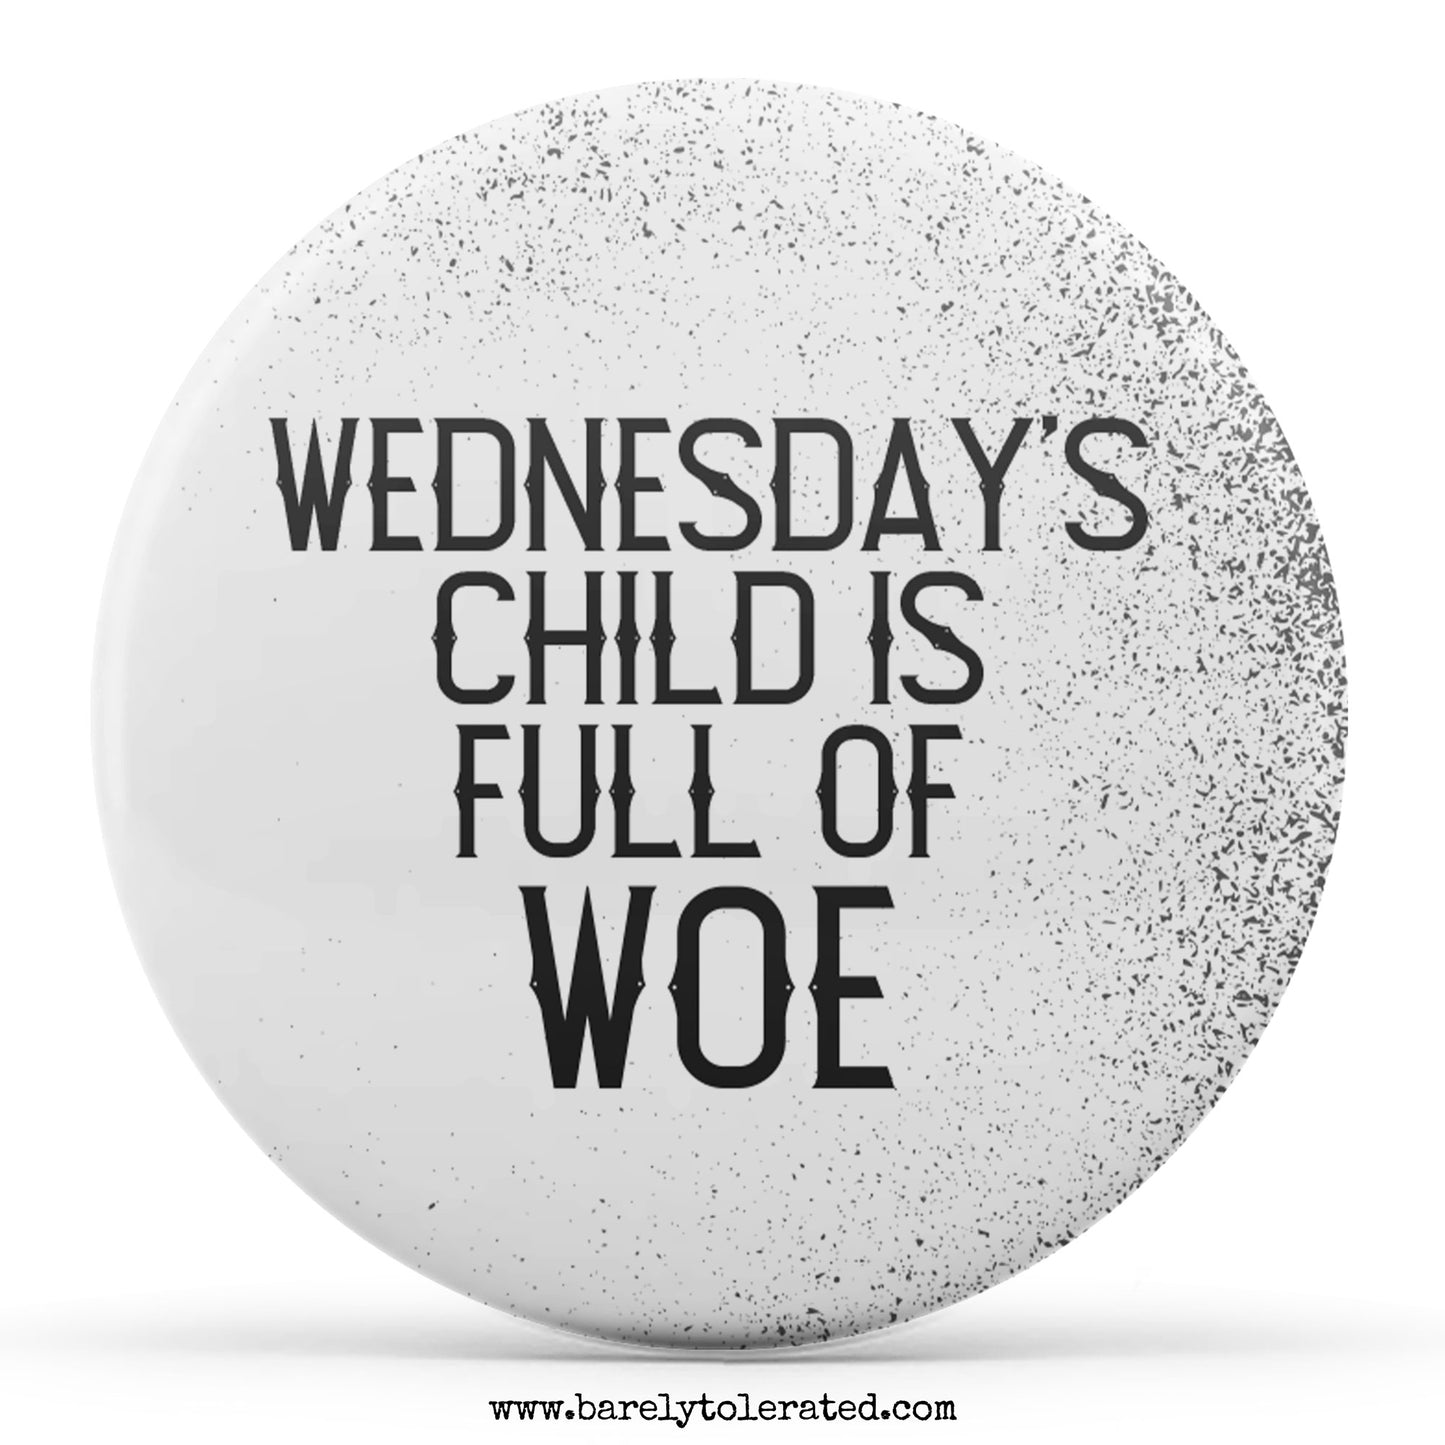 Wednesday's Child is Full of Woe